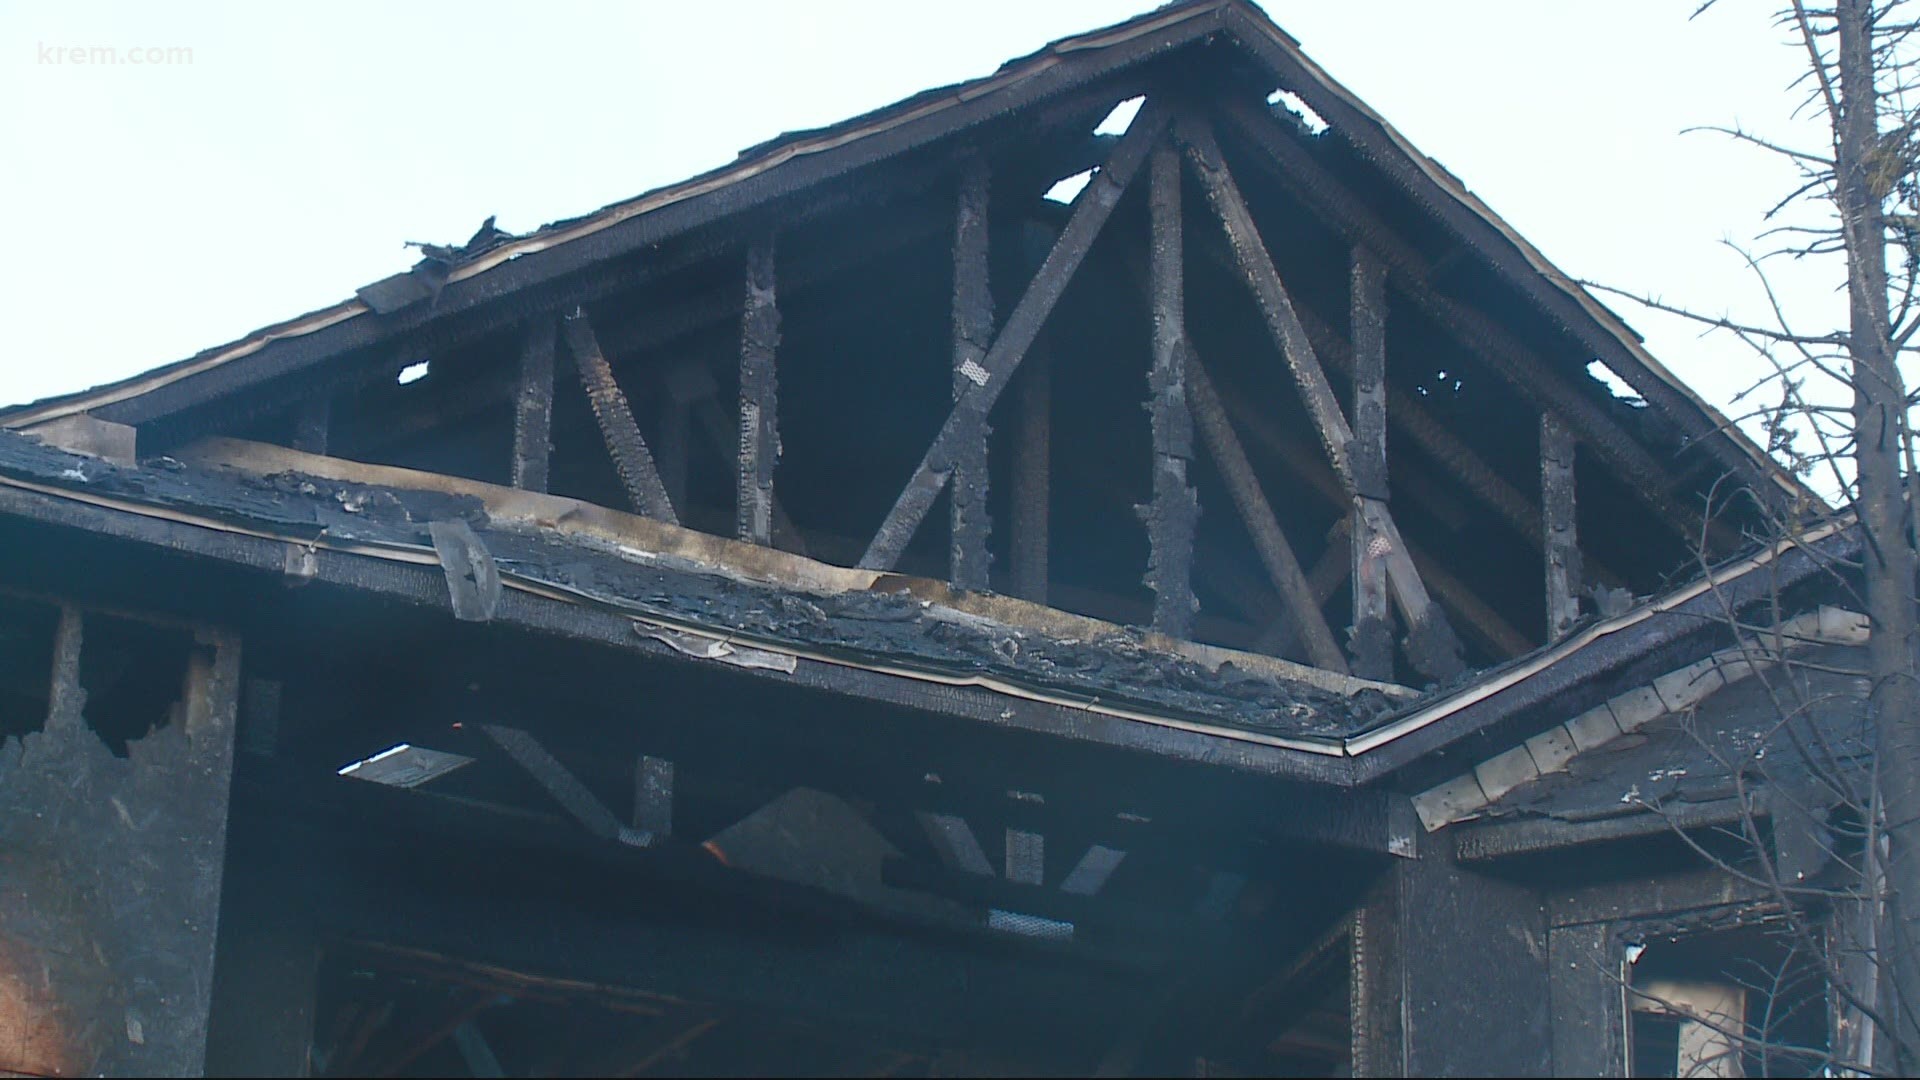 The Spokane Valley Fire Department said the fire took ten minutes to put out and severely damaged two apartments.